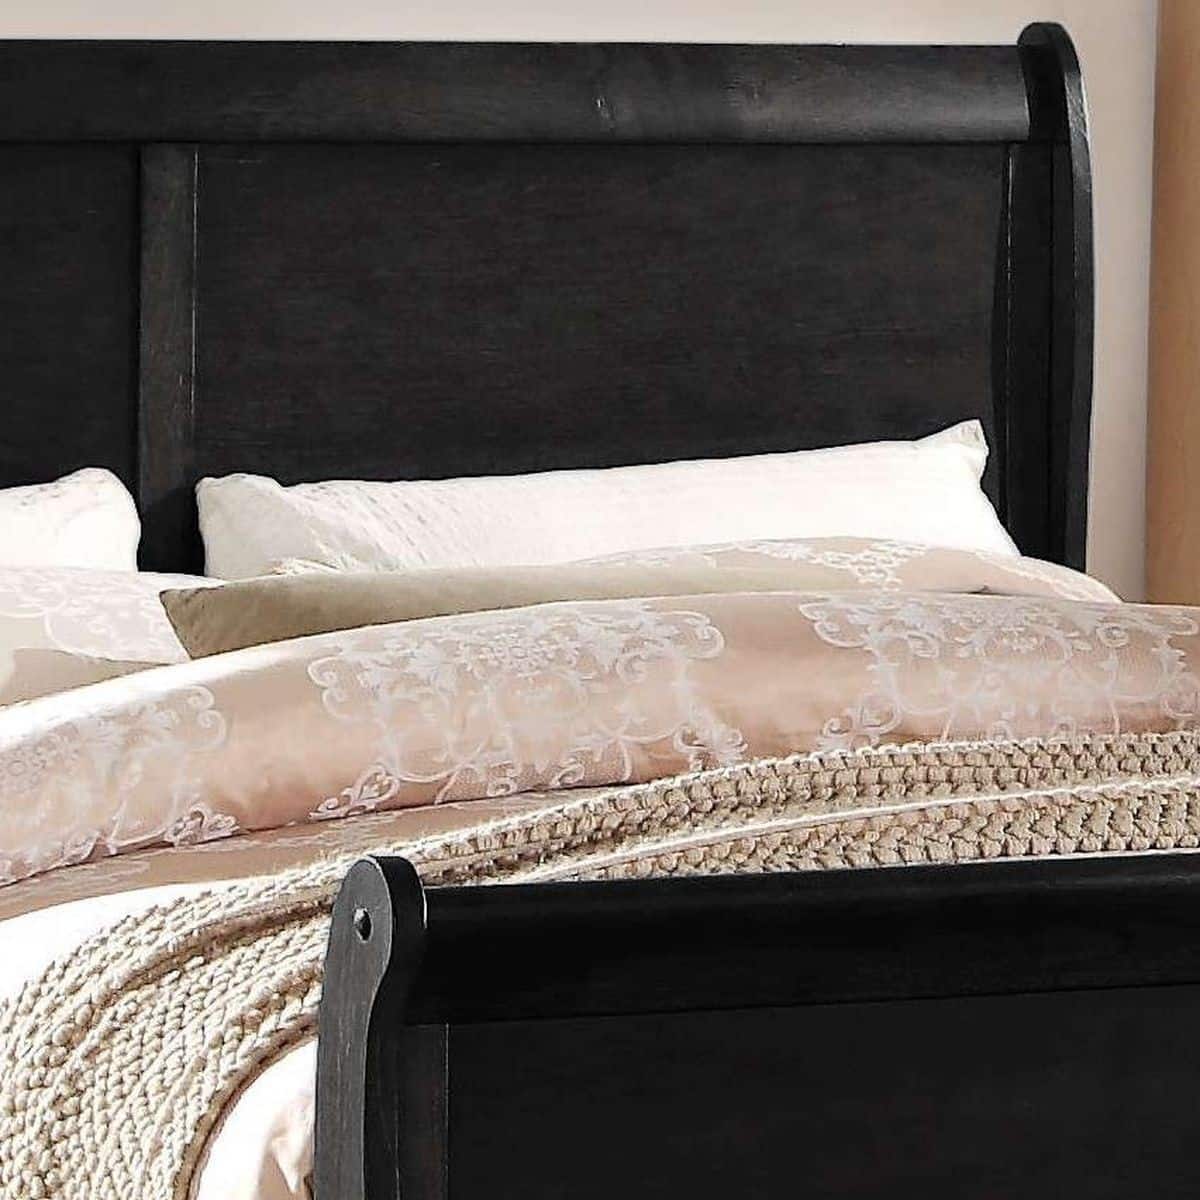 Louis Philippe III Wood Eastern King Bed Sleigh Bed with Headboard and Footboard in Black